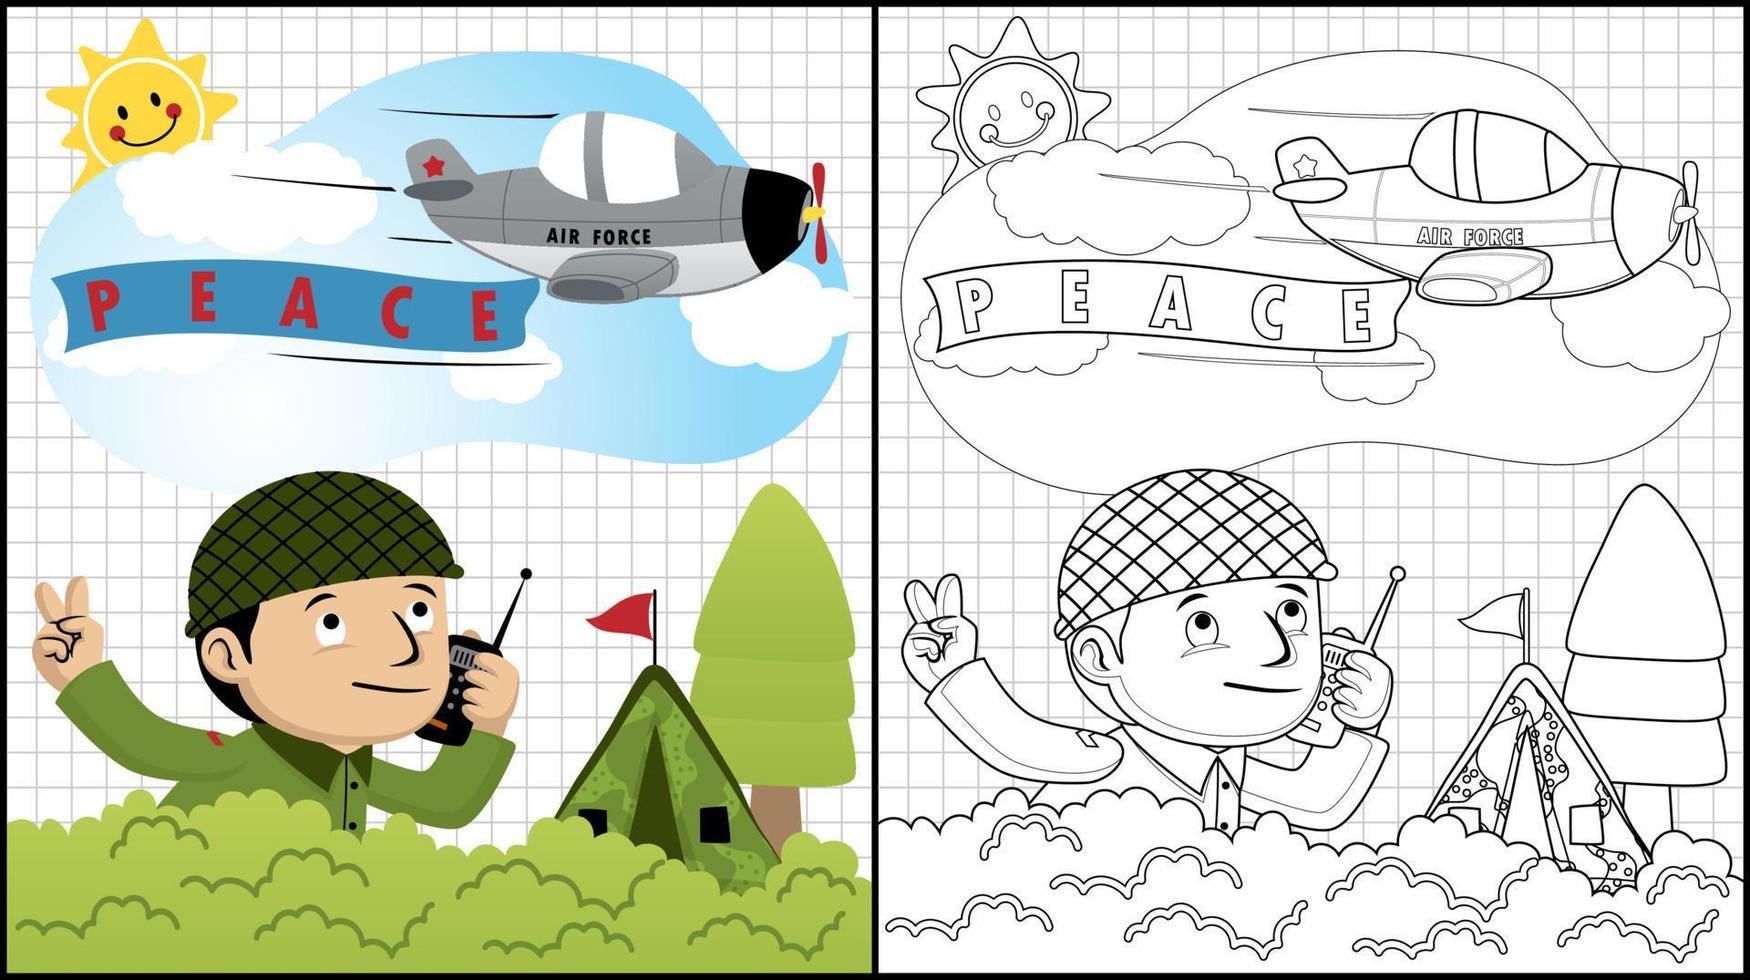 Coloring book of soldier cartoon with walkie talkie, plane fly above him vector